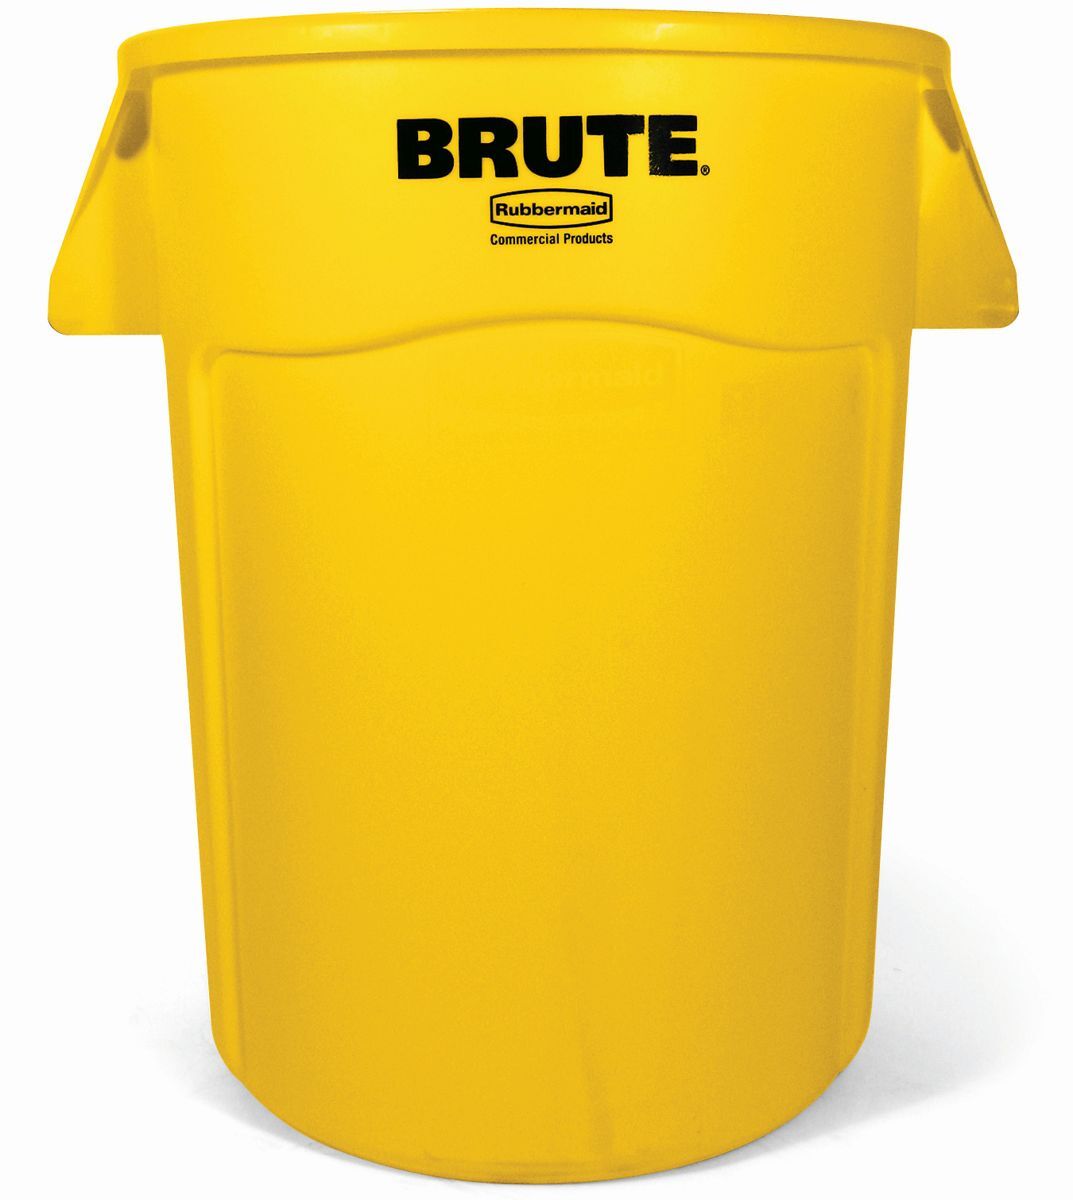 Rubbermaid Ronde Brute Utility container 166,5 ltr, Rubbermaid, model: VB 002643-60, geel